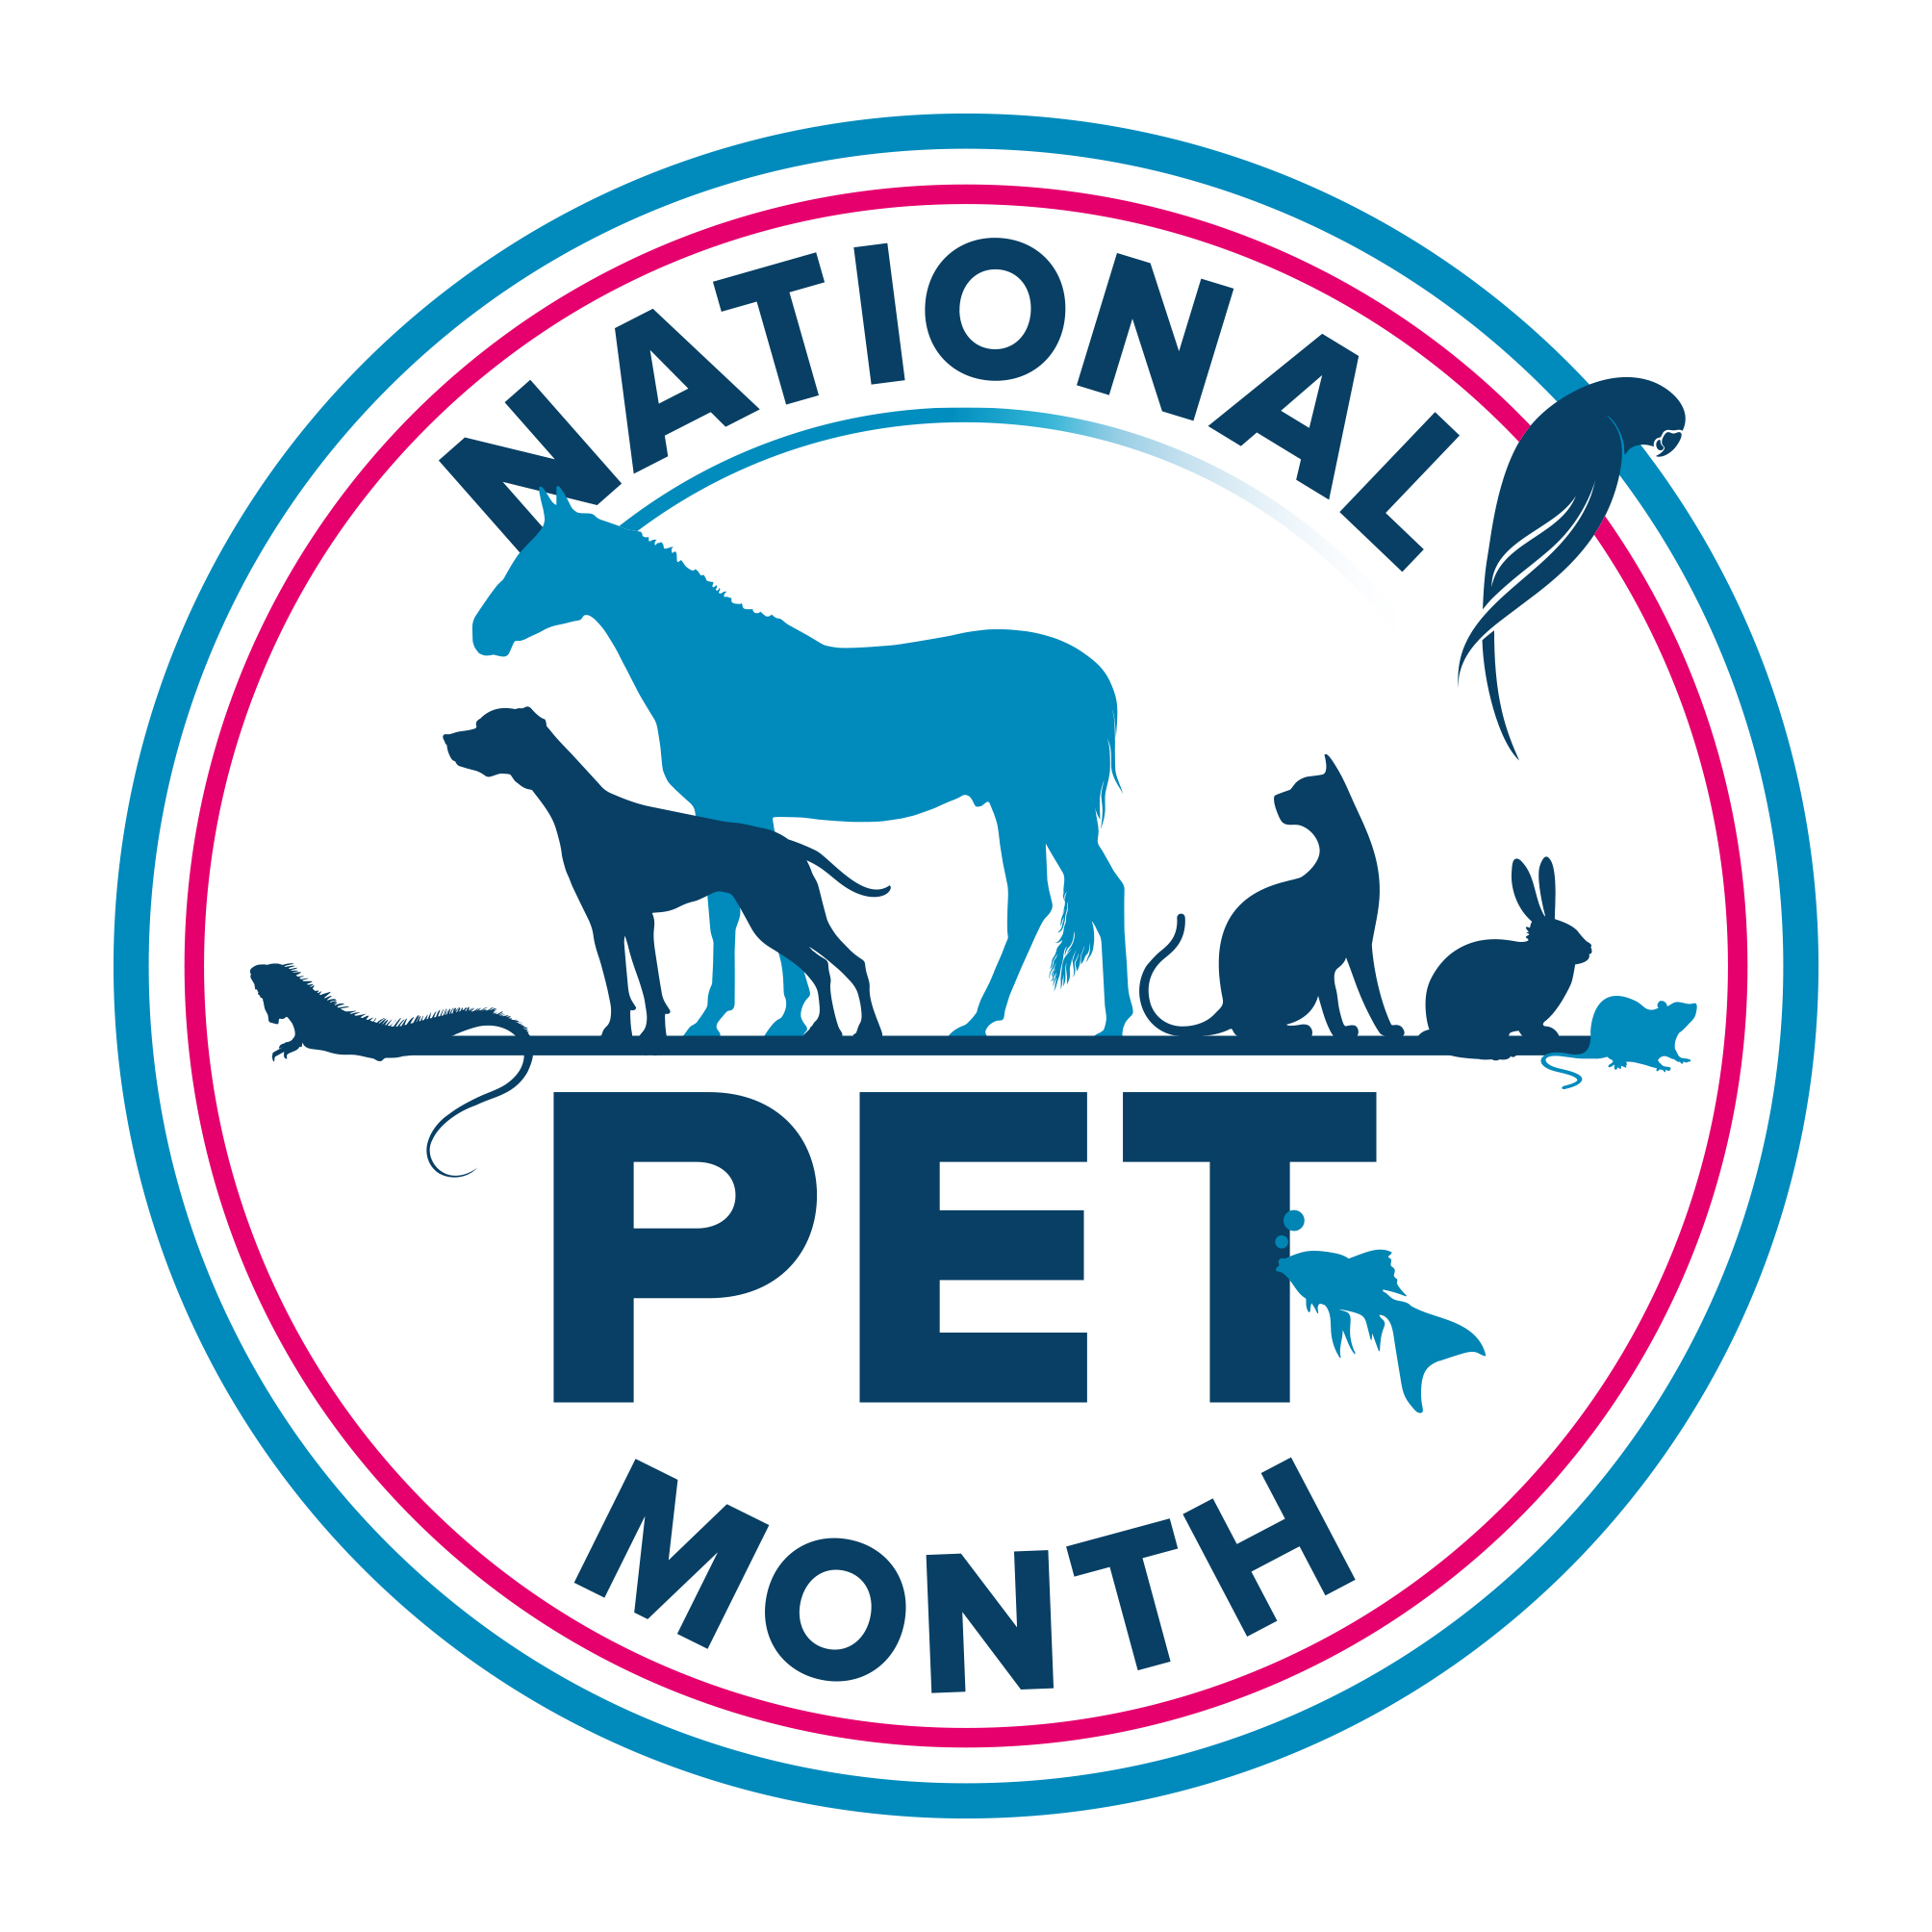 Press release from National Pet Month A YOUNG AMBASSADOR FOR